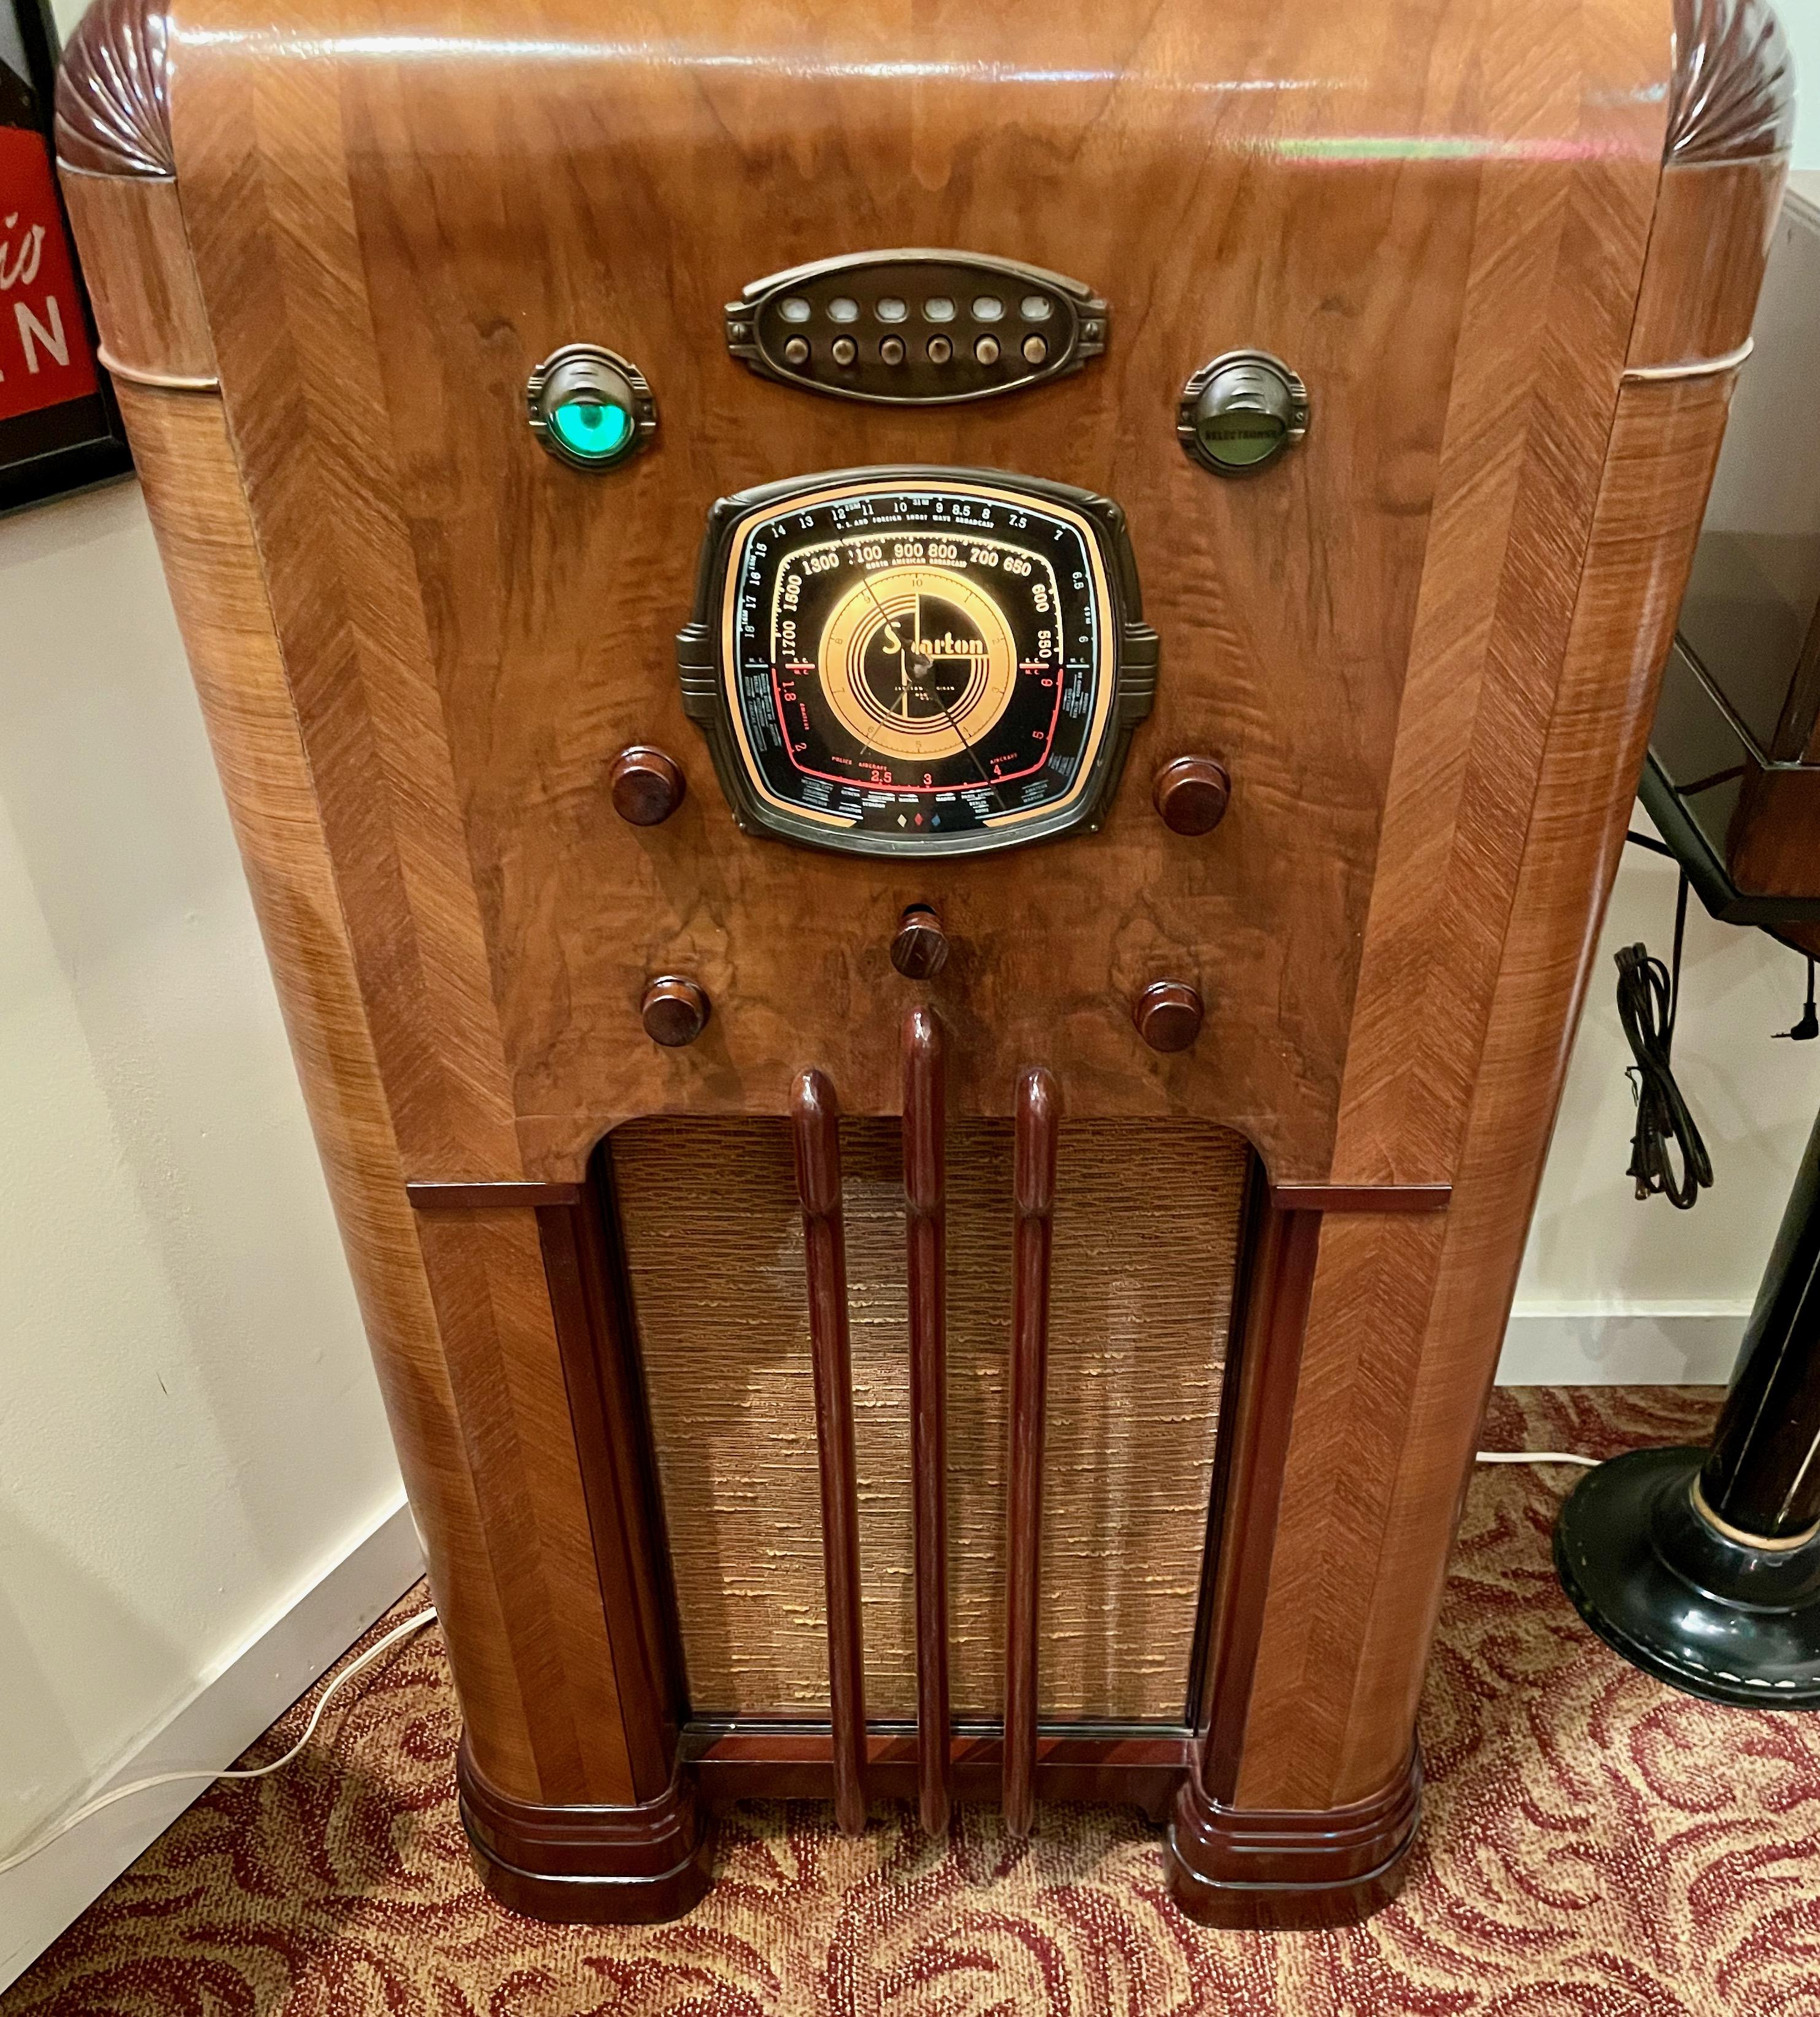 Sparton 1268 Selectronne Console 1938 Radio. 12 Tube model a great performer, with magic eye tuning tube and the multi-colored dial has three bands. The complete electronic restoration was performed, original knobs and 1/8th inch input plug added to